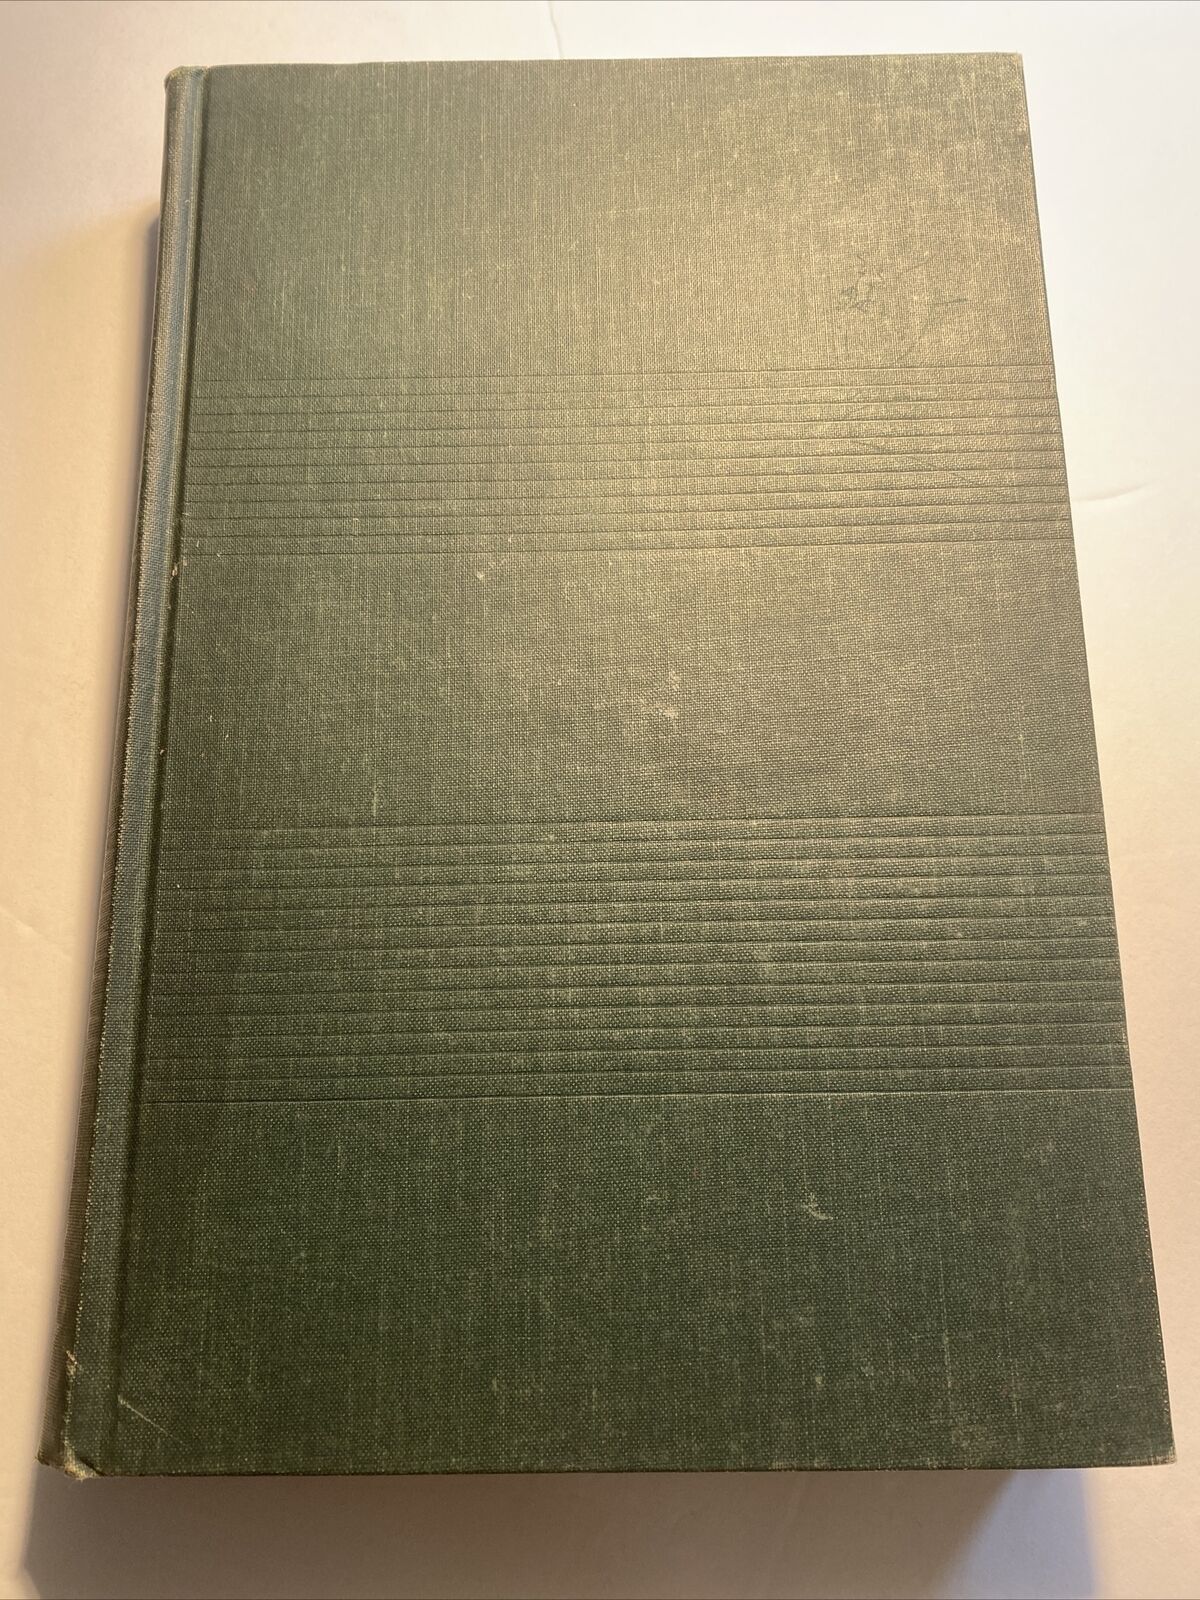 1947 Applied Thermodynamics -Virgil Faires Old Engineering ￼Textbook